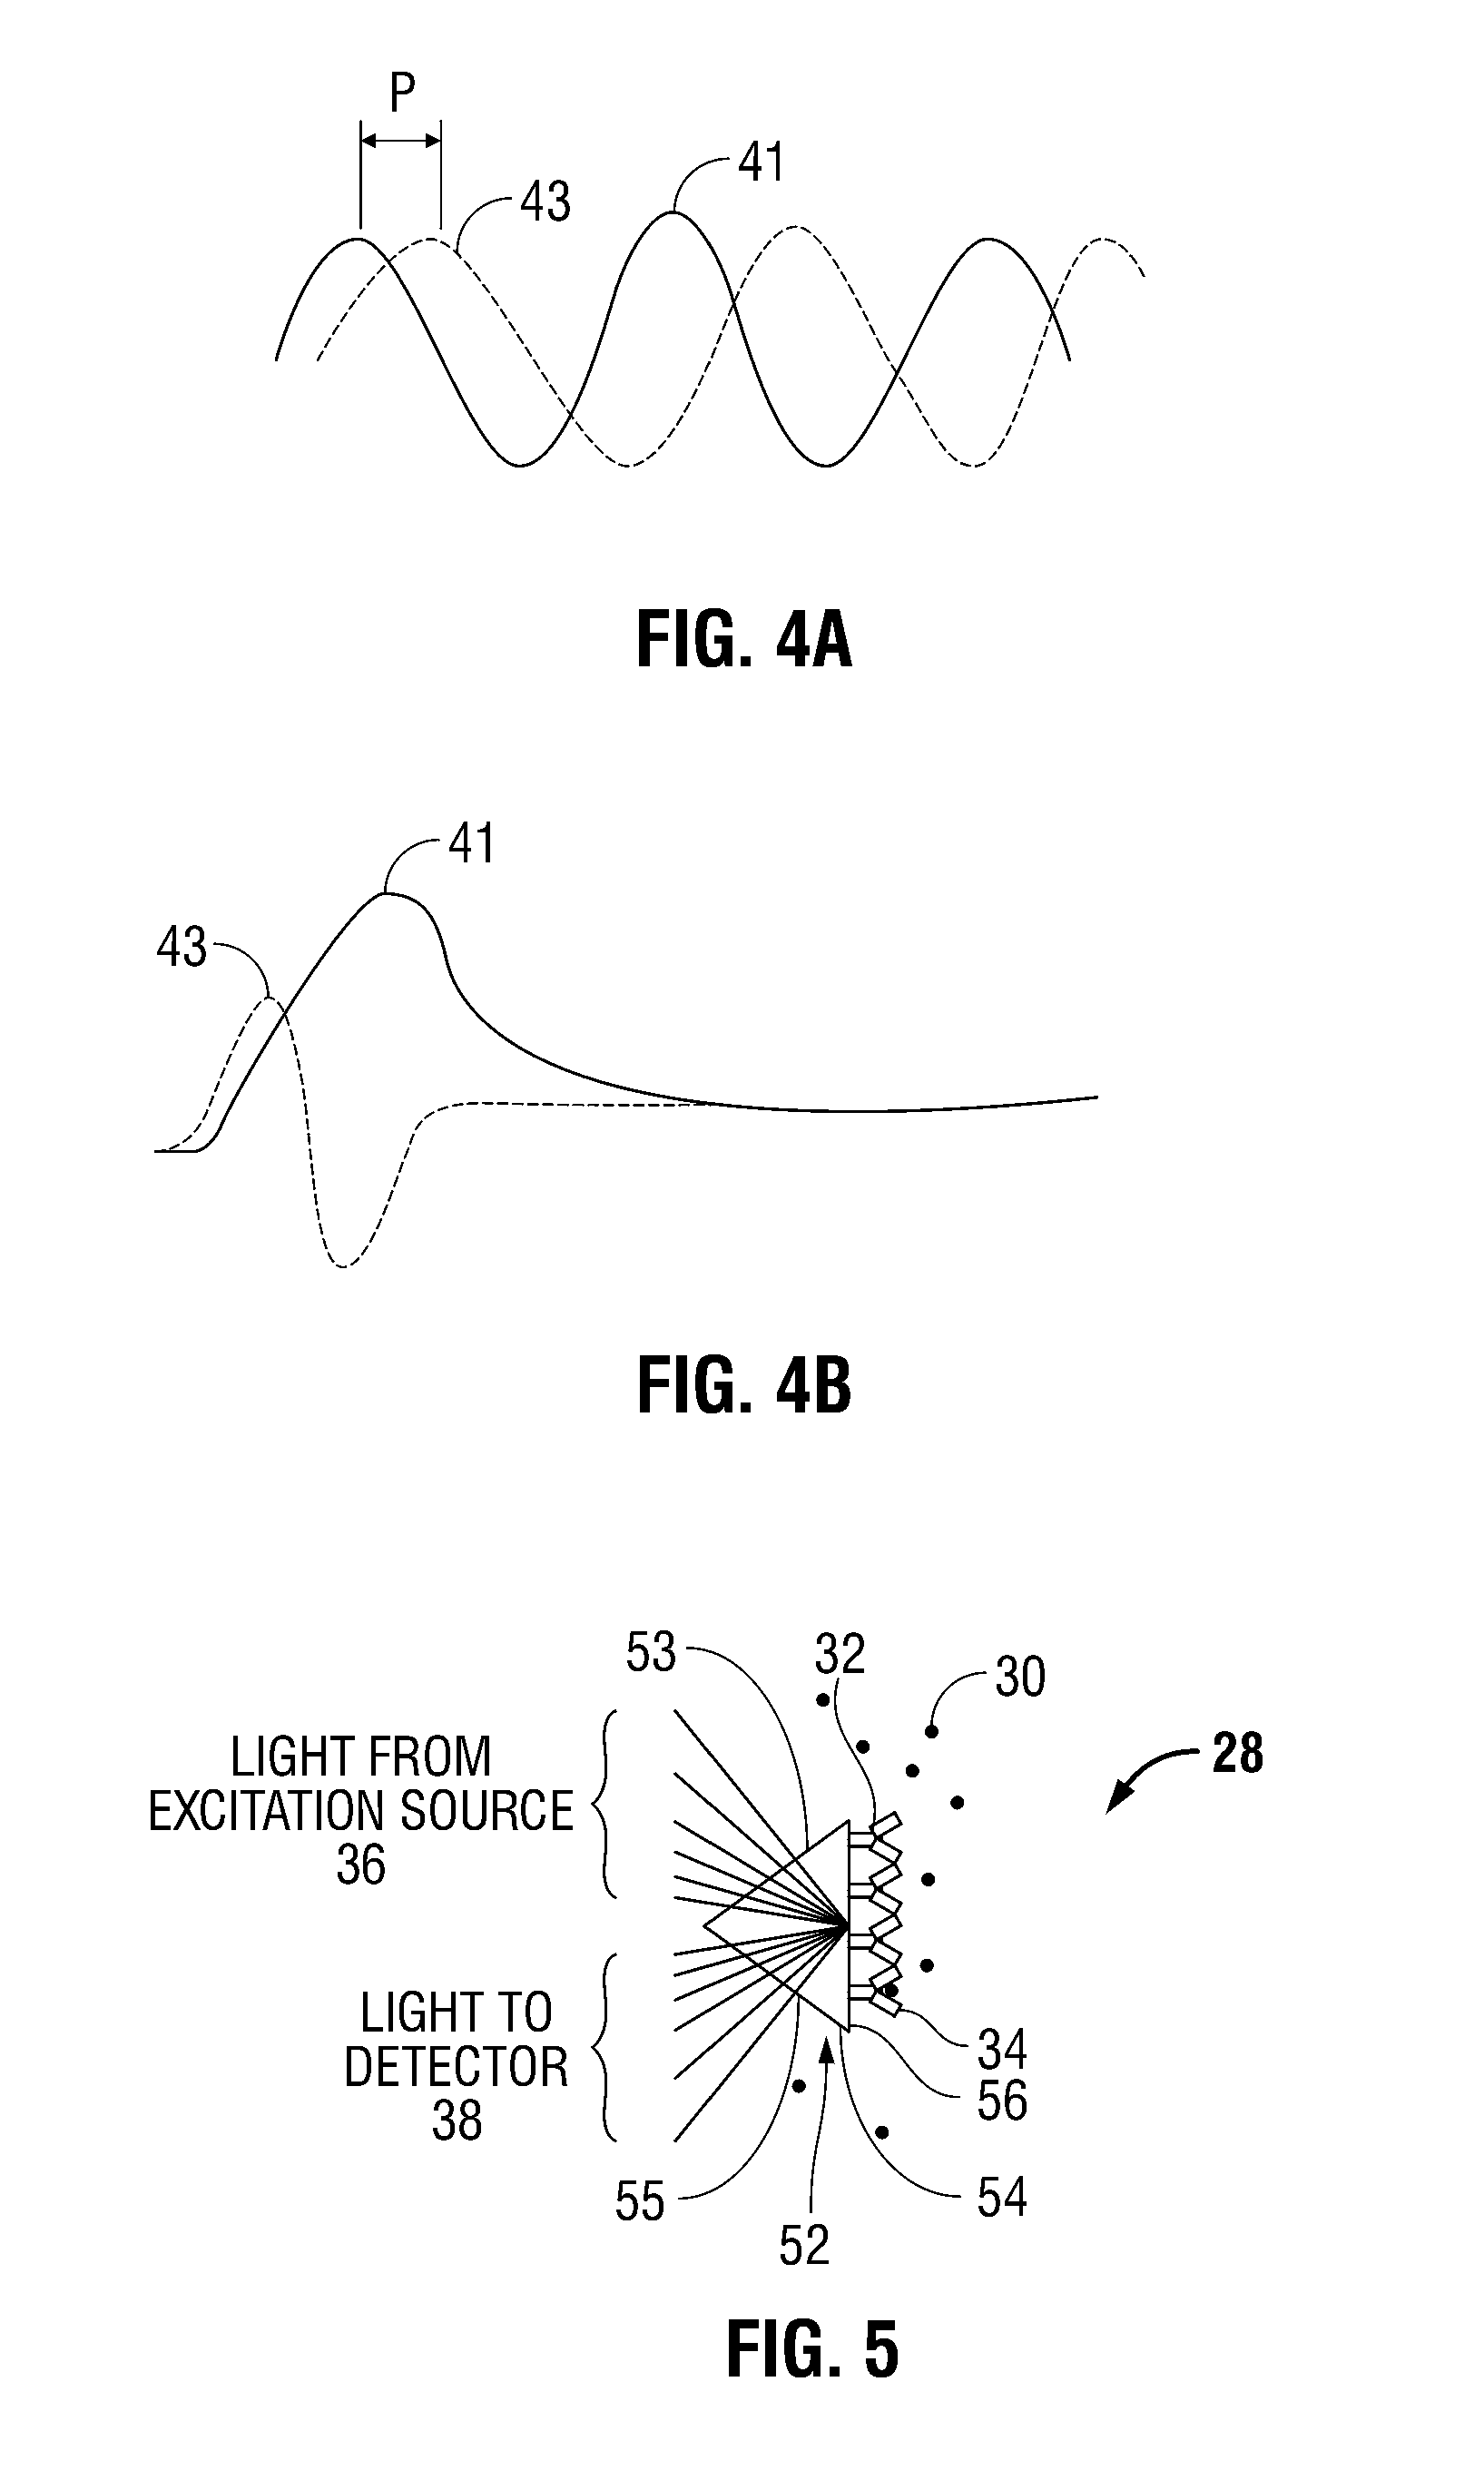 System and Method for Optical Continuous Detection of an Analyte In Bloodstream